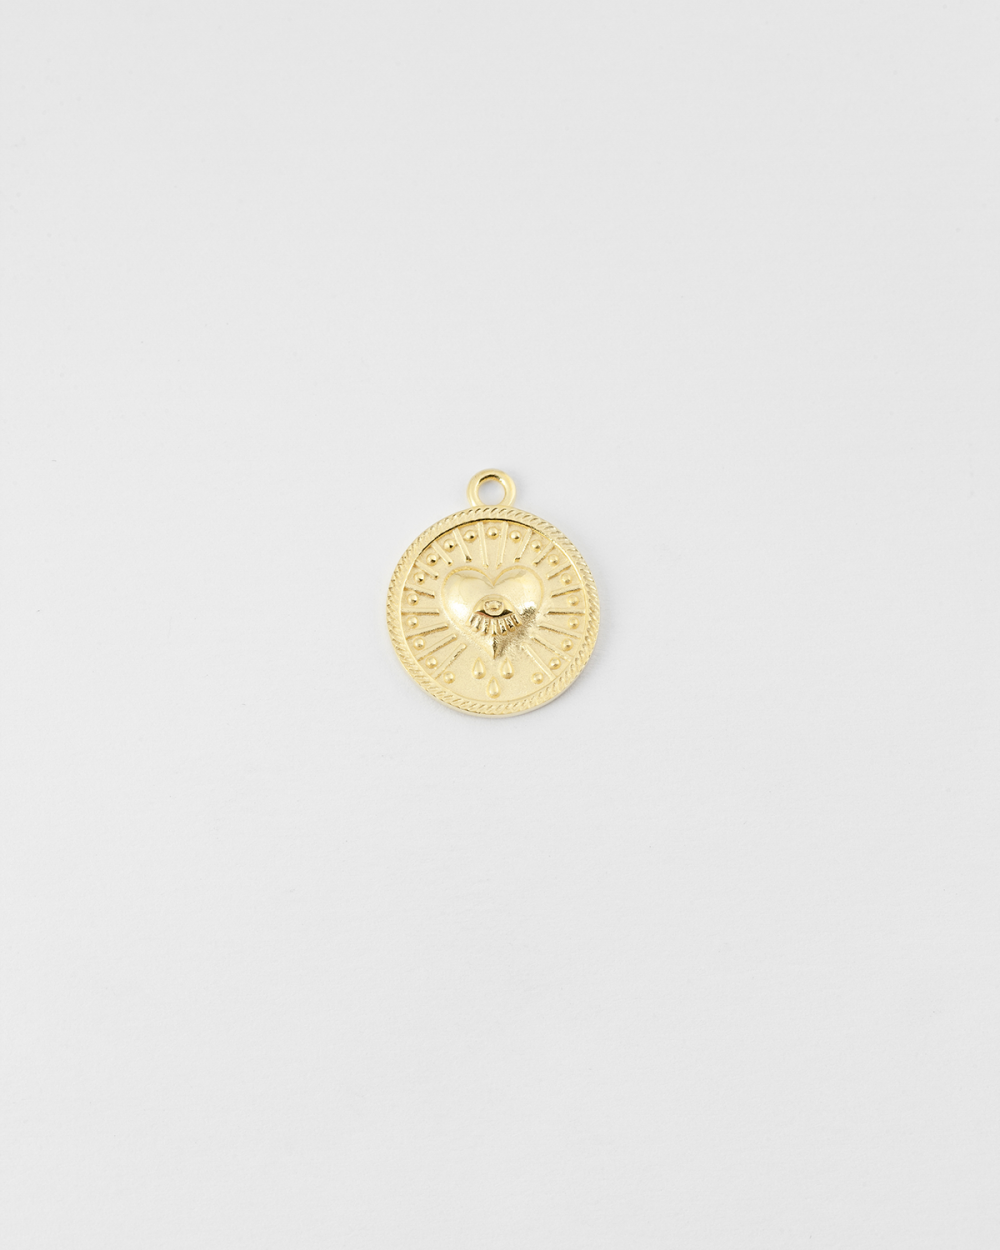 YELLOW GOLD THE LOVERS CHARM